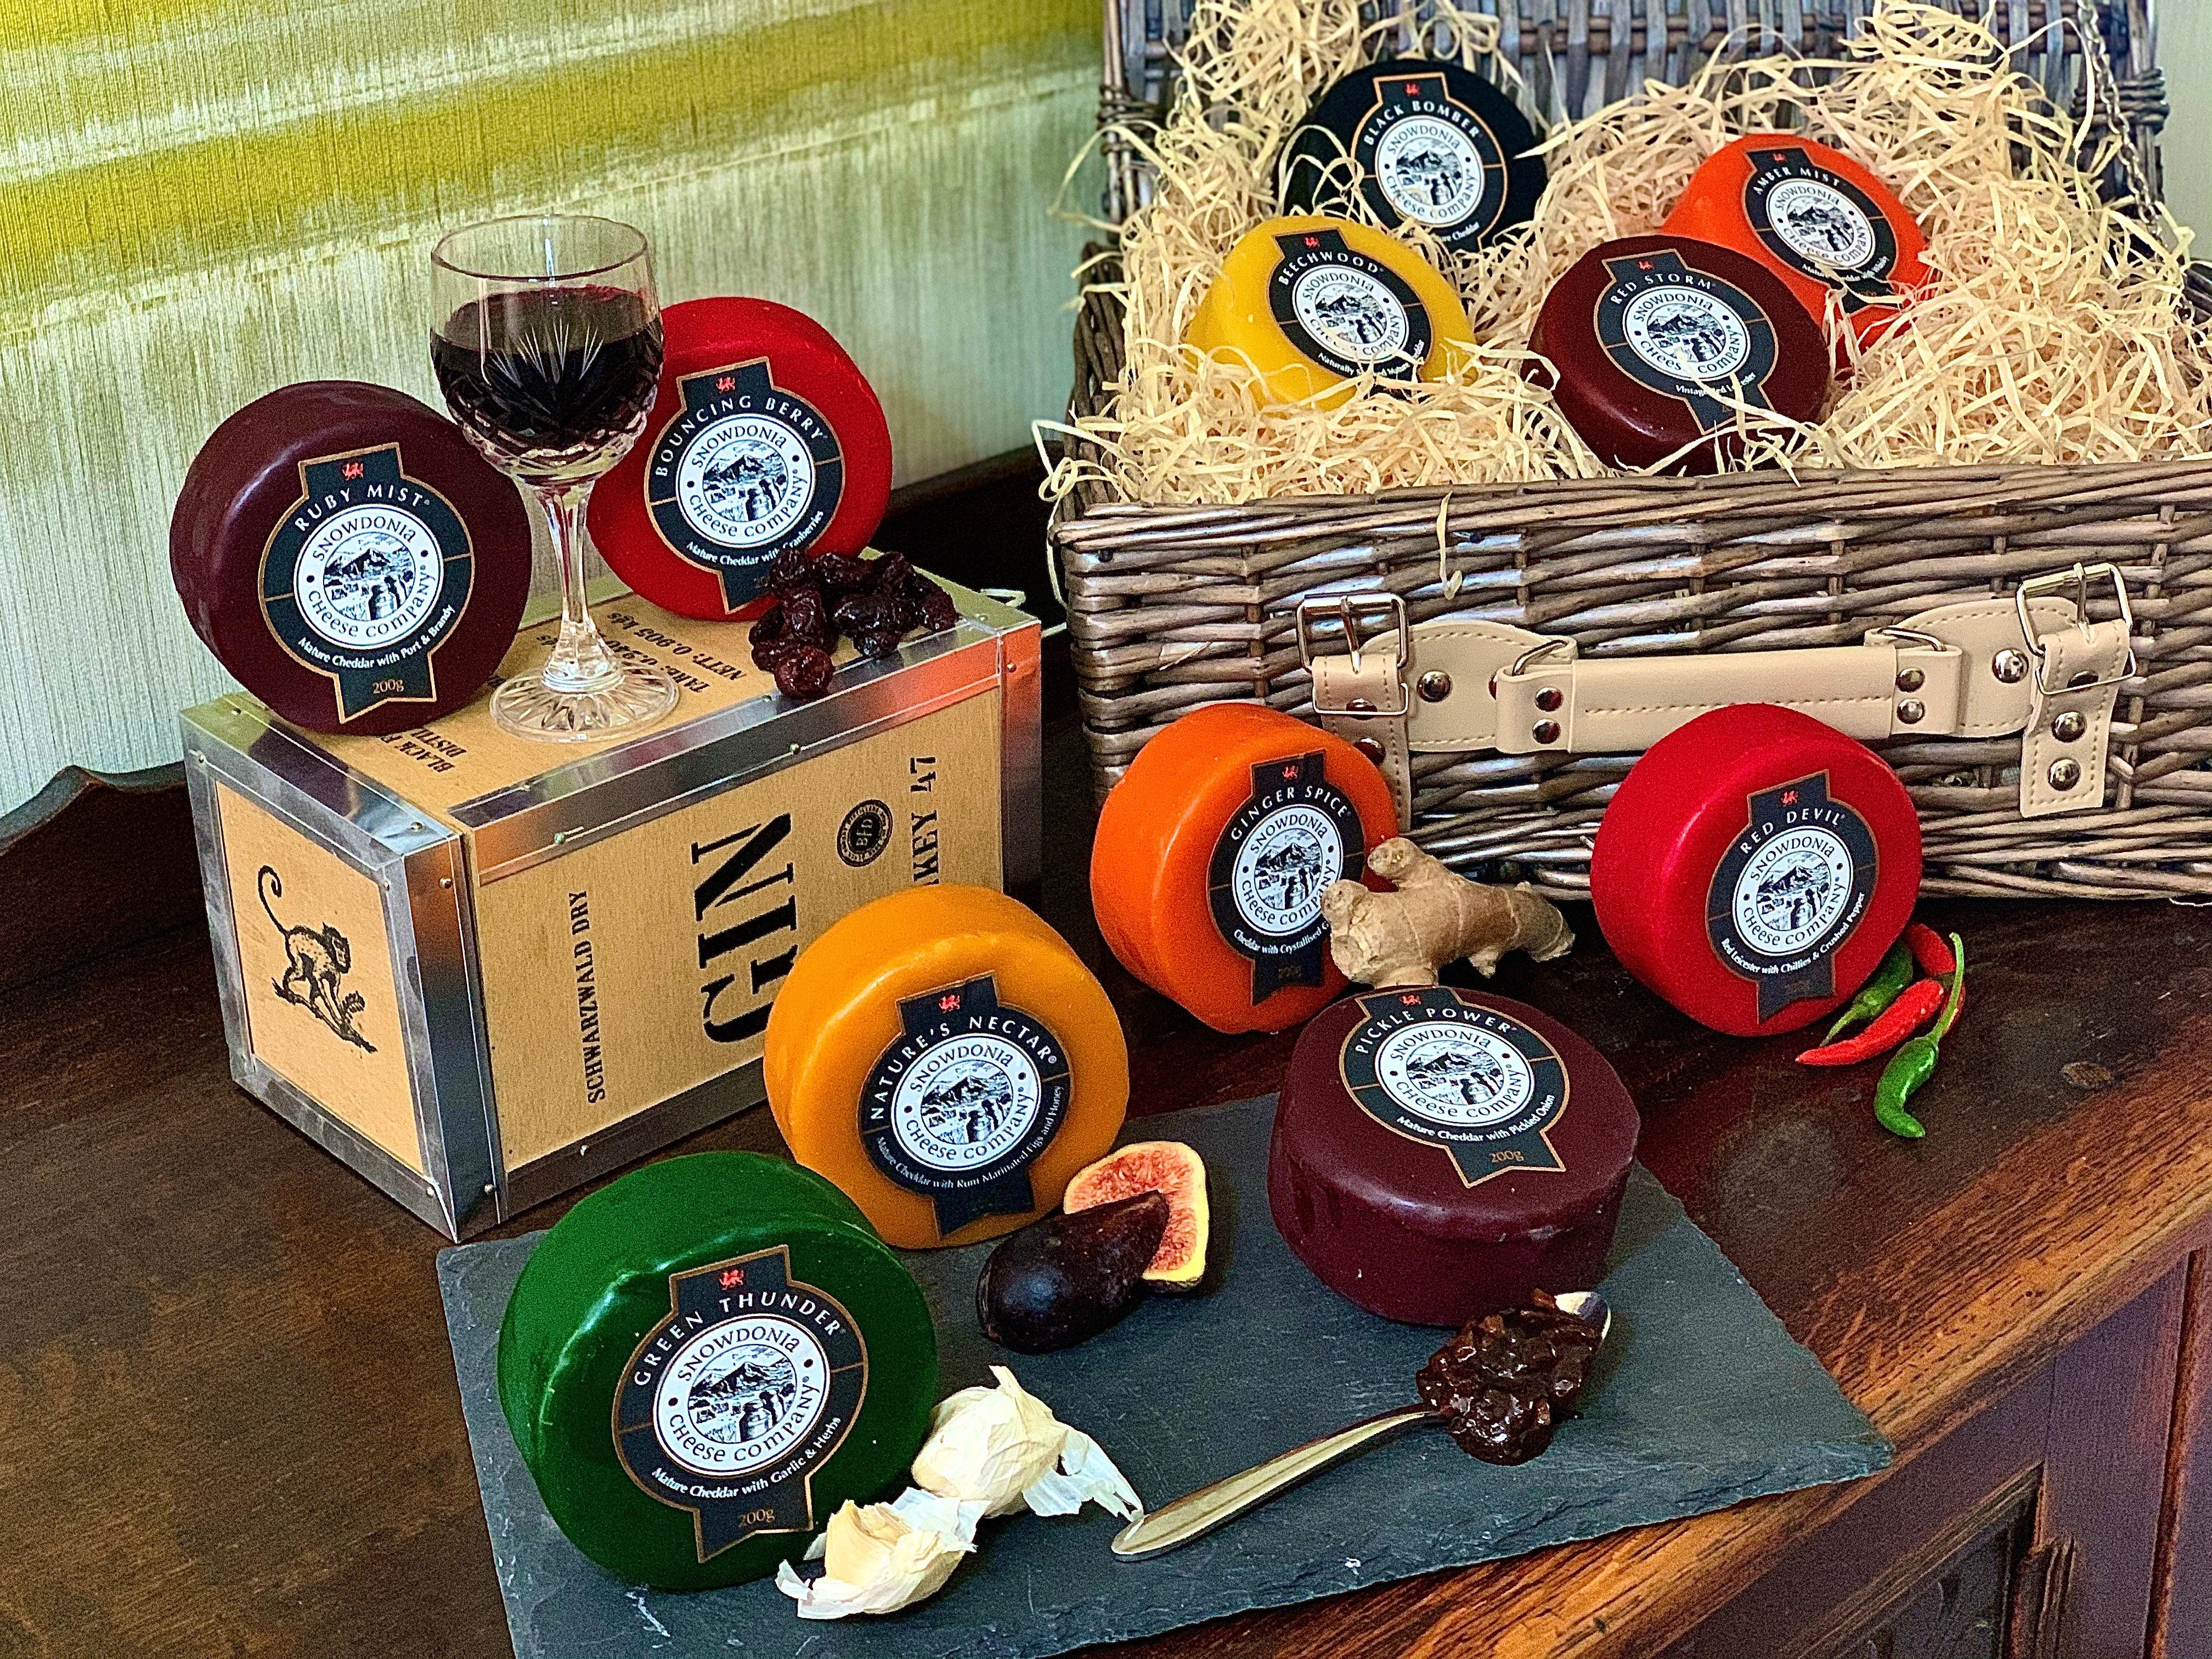 The Snowdonia Cheese Collection Hamper 2.35kg (cheese weight) - Celebration Cheeses